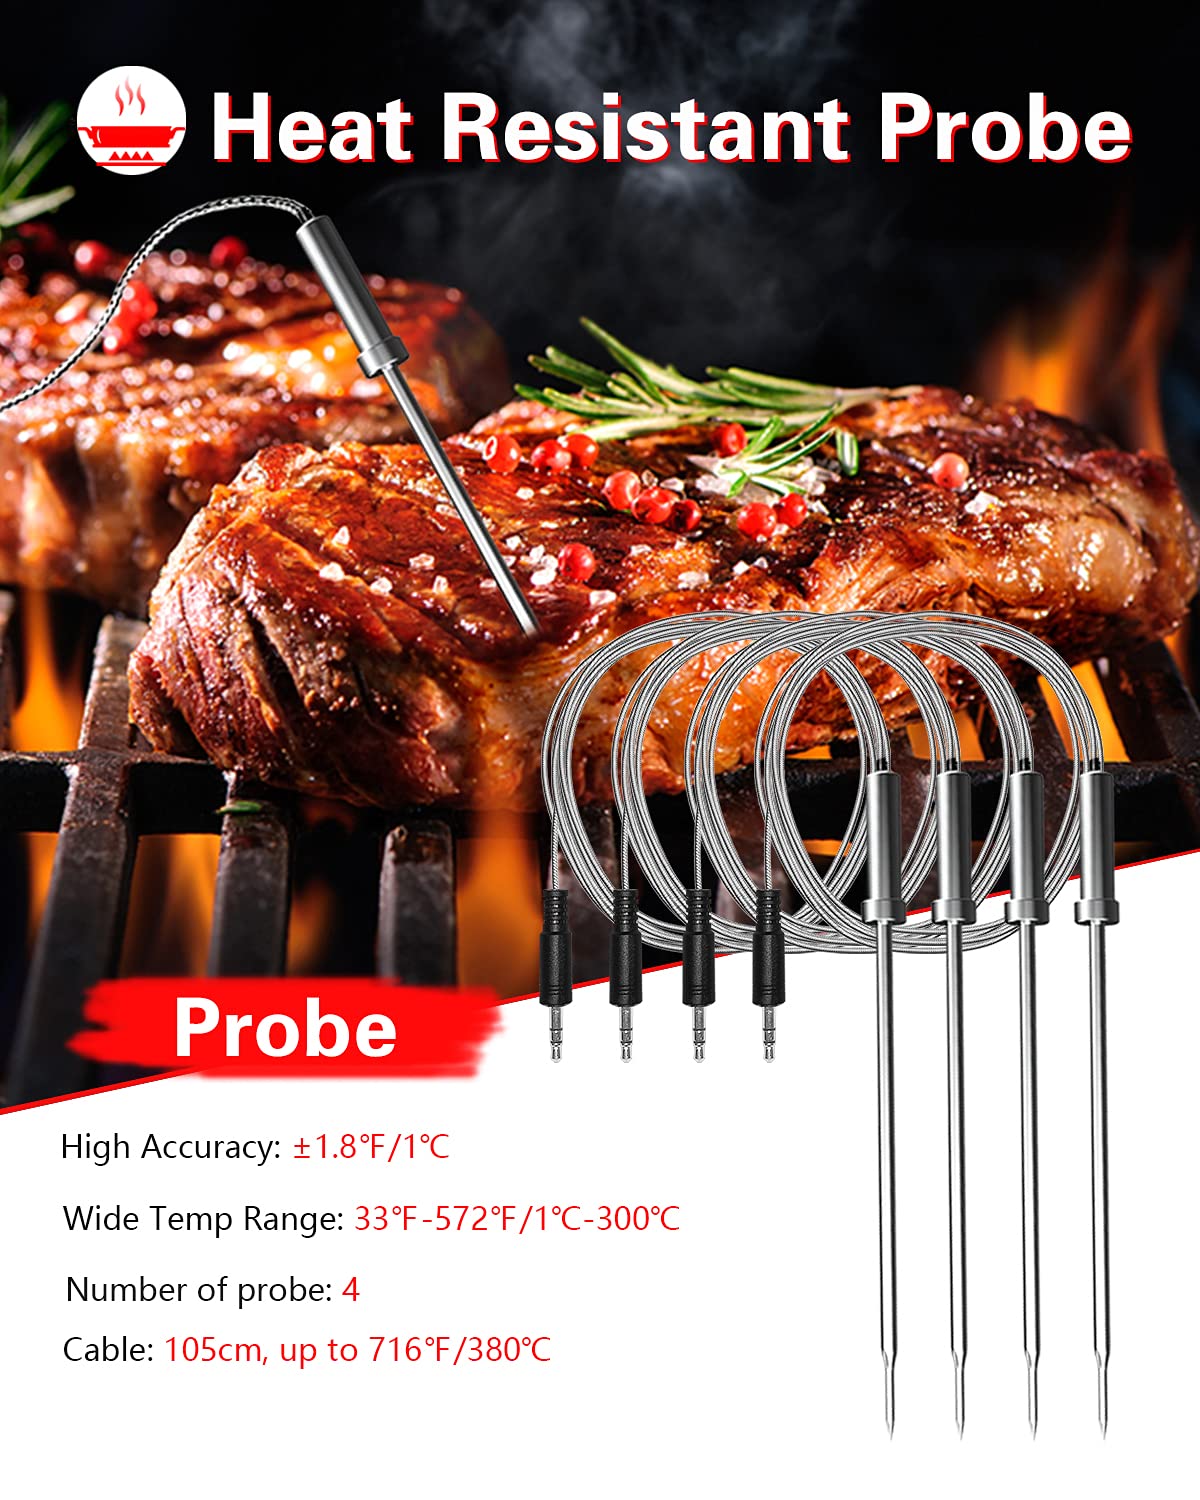 BFOUR Wireless Grill Thermometer, Bluetooth Meat Thermometer, Digital BBQ Meat Thermometer for Grilling Smoker Oven, Smart APP Alarm Monitor Instant Read with 4 Stainless Steel Probes